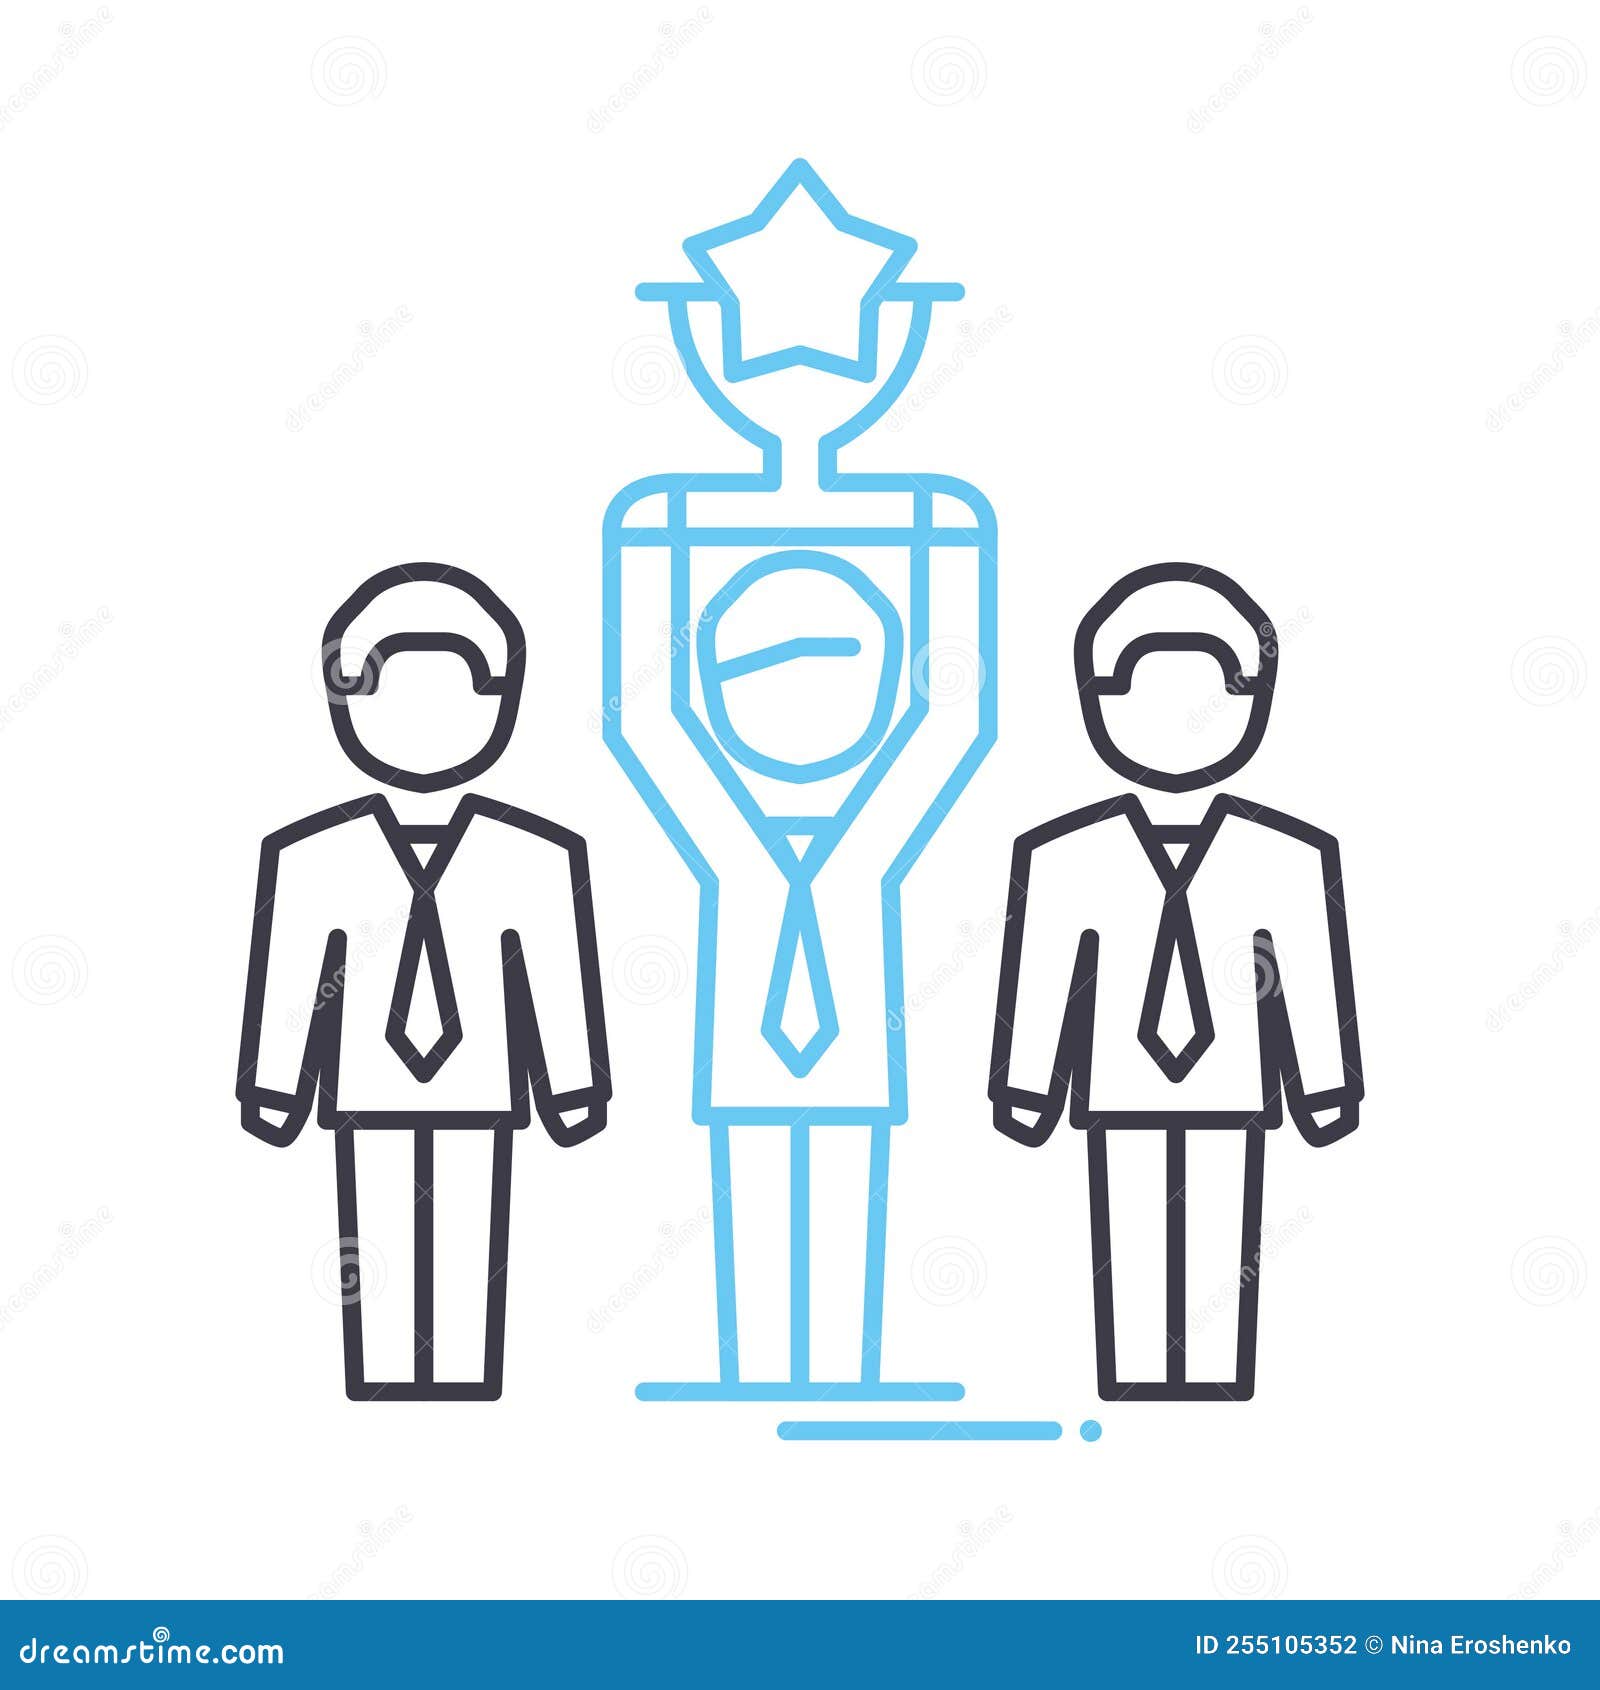 Leader Employee Line Icon, Outline Symbol, Vector Illustration, Concept  Sign Stock Vector - Illustration of organization, manager: 255105352